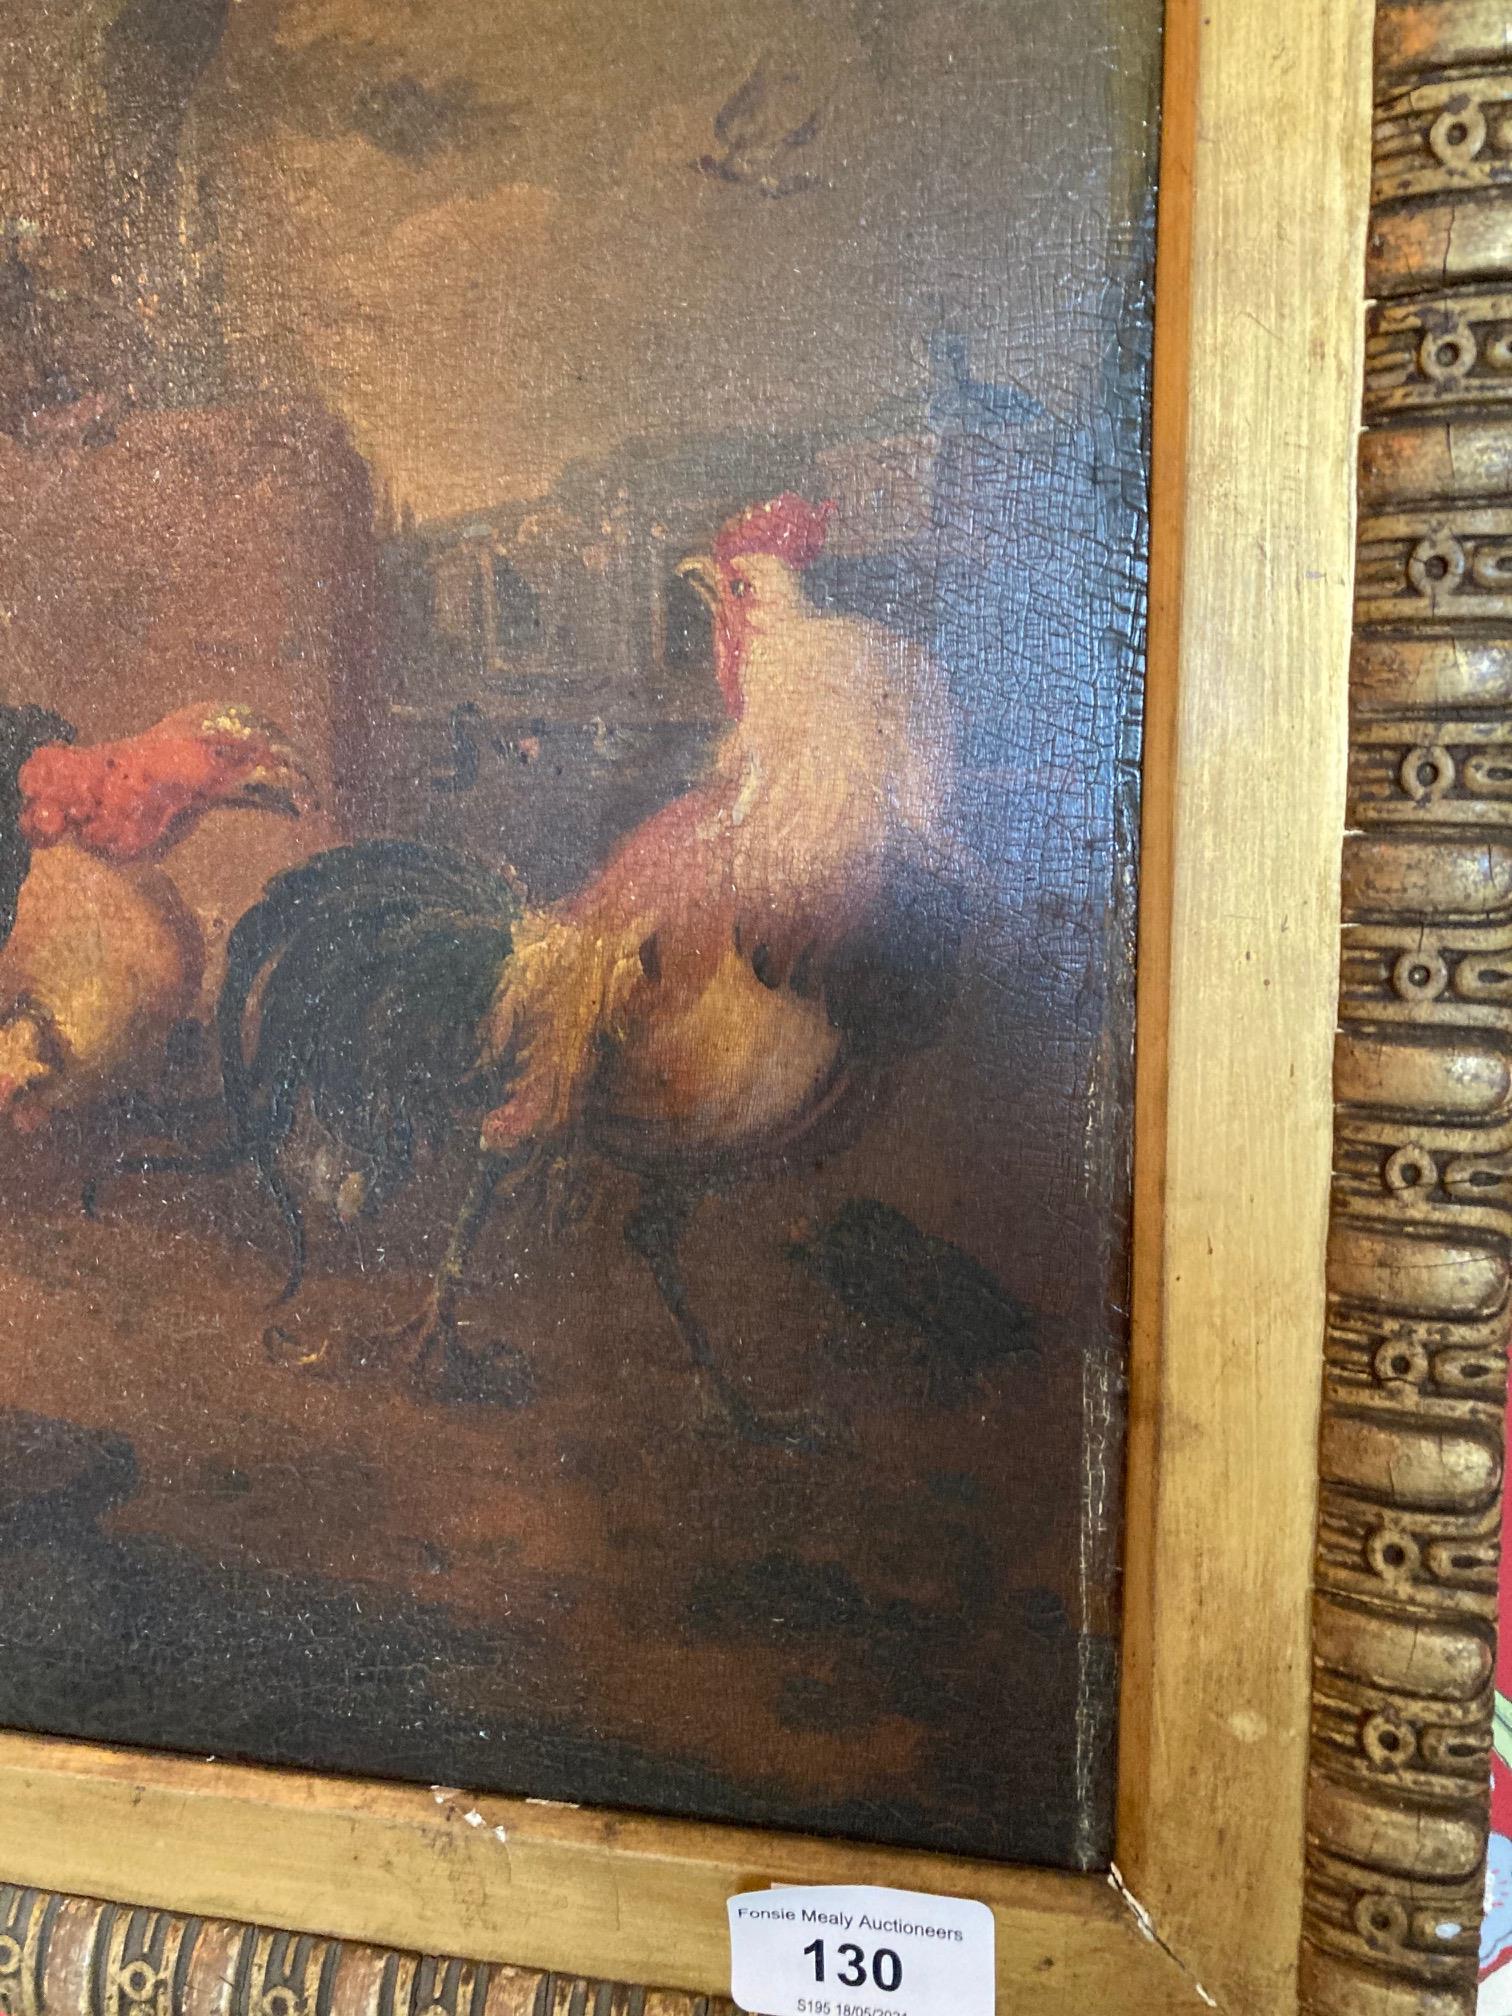 Follower of Jacob Bogdani (1660 - 1724) "Domestic and Exotic Birds near a Stately Home," and its - Image 18 of 26